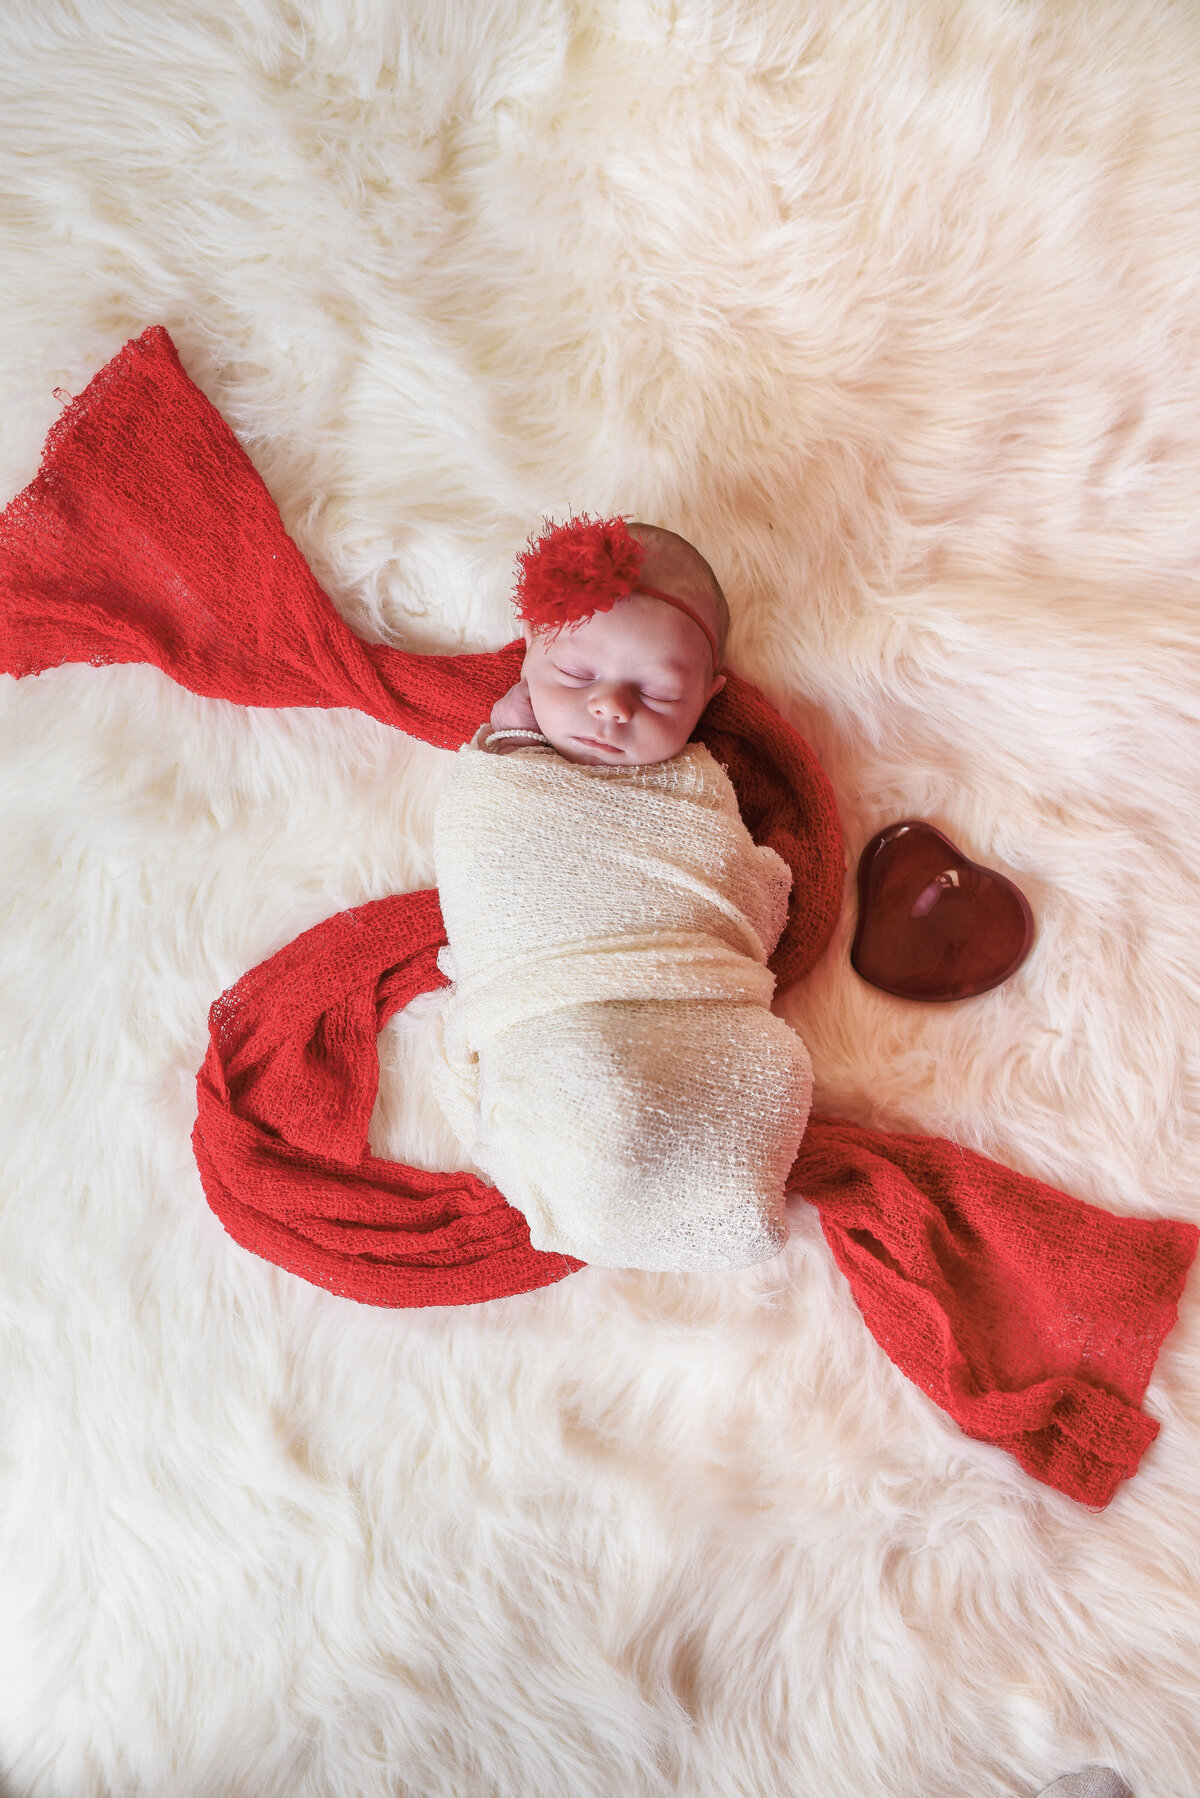 Beautiful Mississippi newborn photography: newborn girl red with a red glass Tiffany heart for Valentines in Mississippi